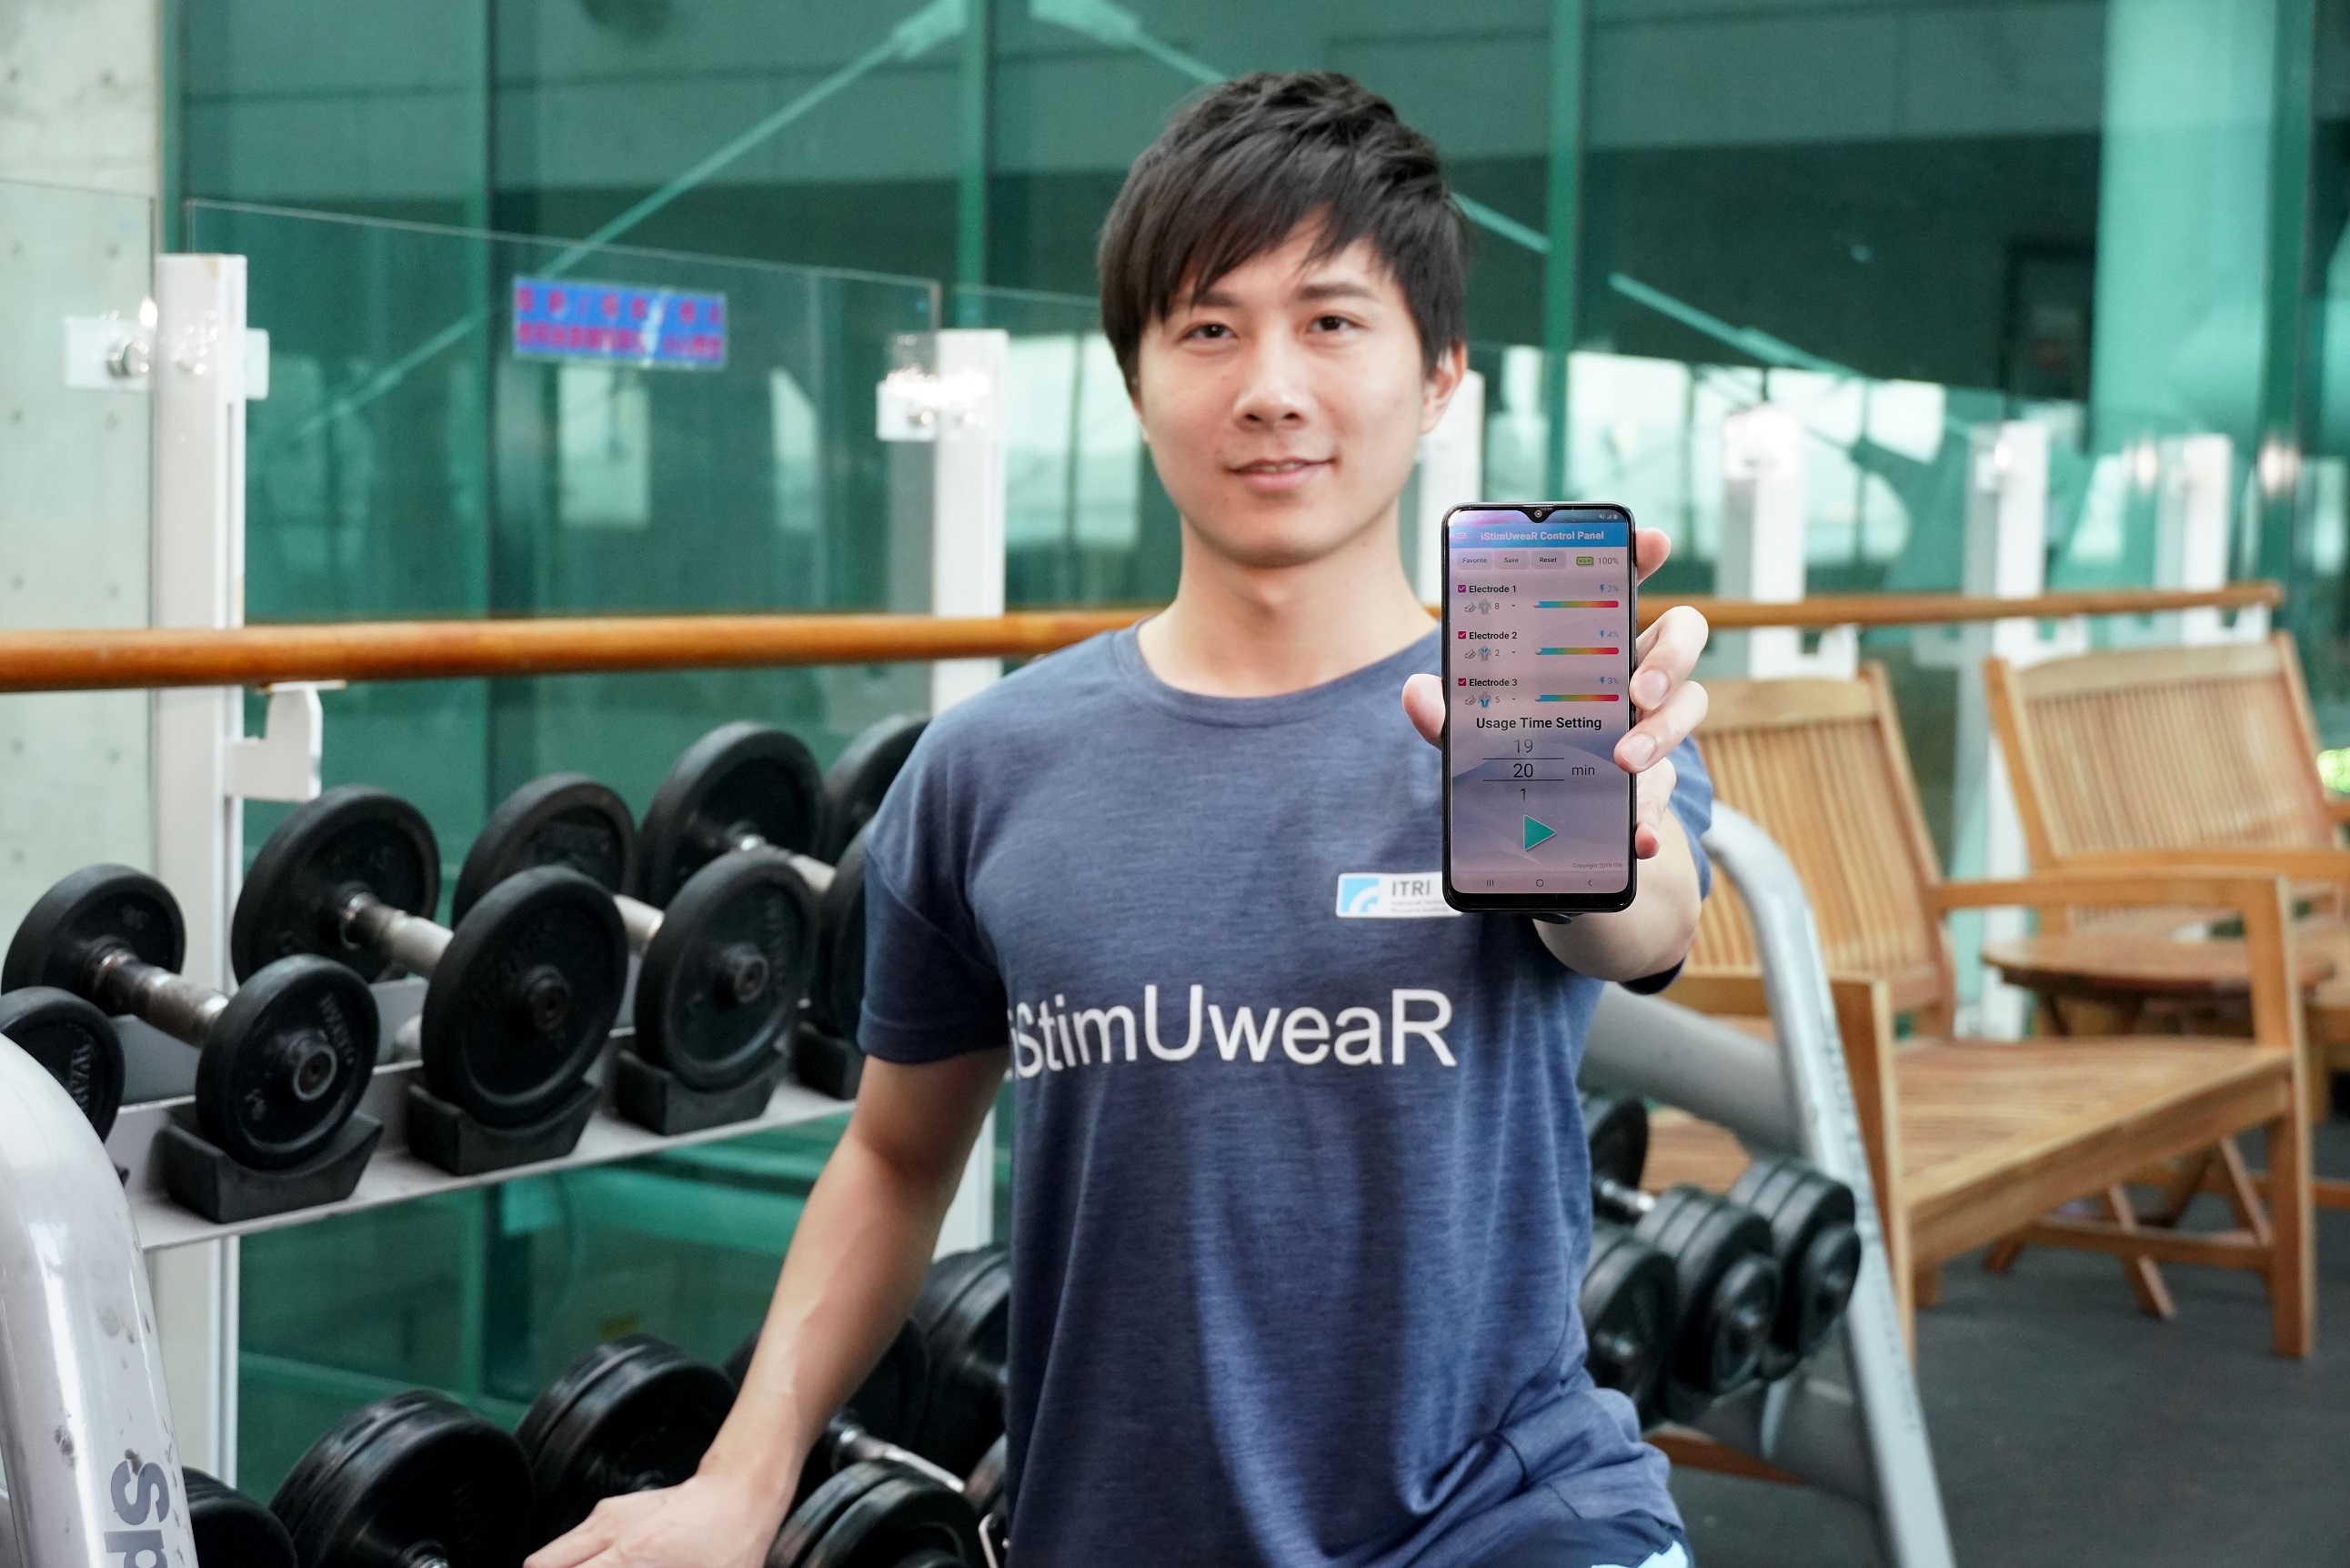 ITRI’s iStimUweaR, a CES 2020 Innovation Awards Honoree, is a hybrid smart wearable system that can help relax muscle.